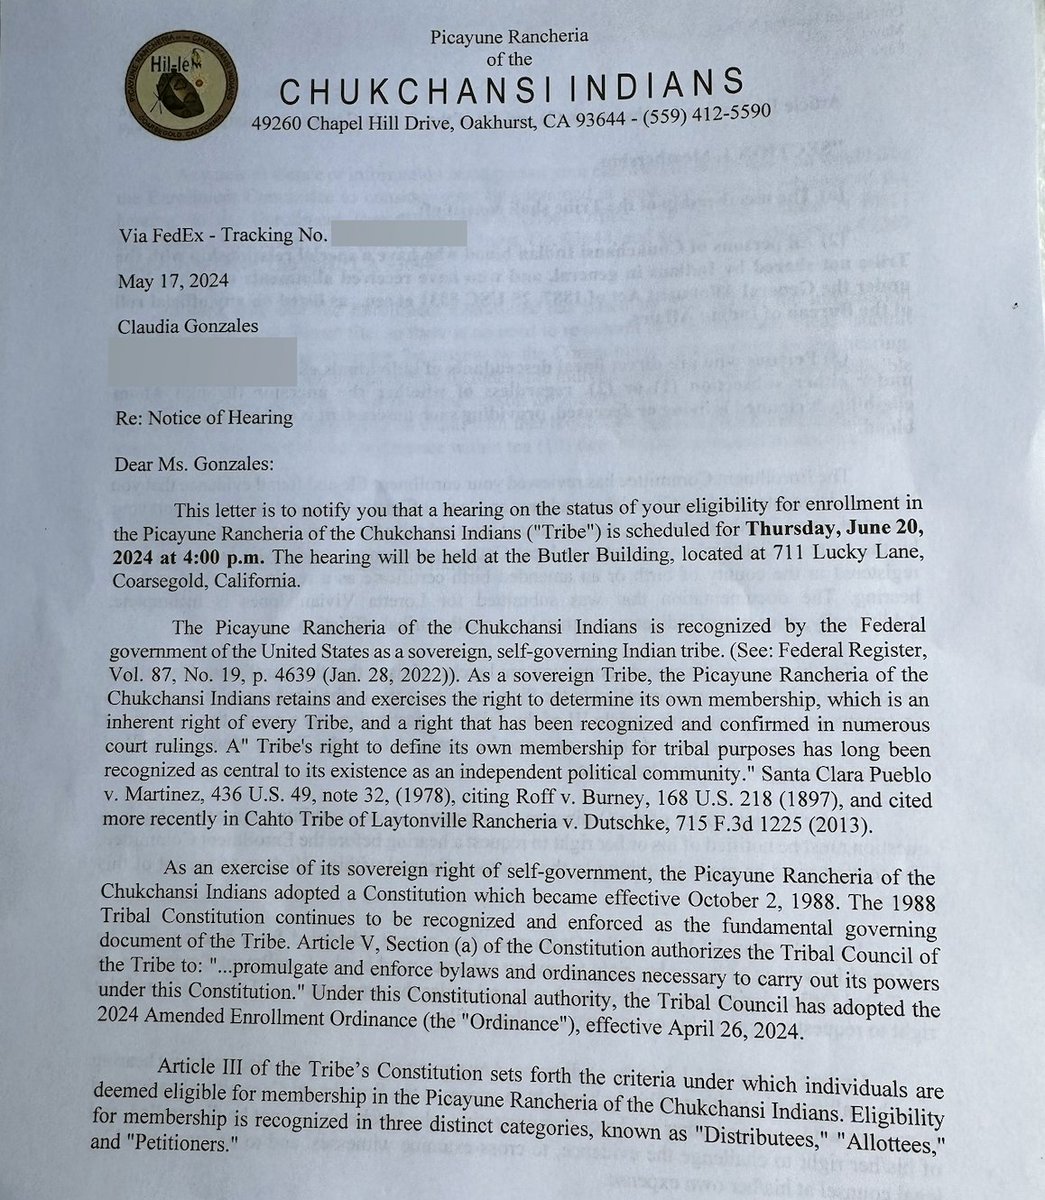 Tragically, former Chukchansi Chair Claudia Gonzales & her family are the next cohort of Chukchansi people who are slated for disenrollment. Not since the Obama administration in 2016 has the U.S. developed any policy to contend with such domestic human rights abuse. It's time.